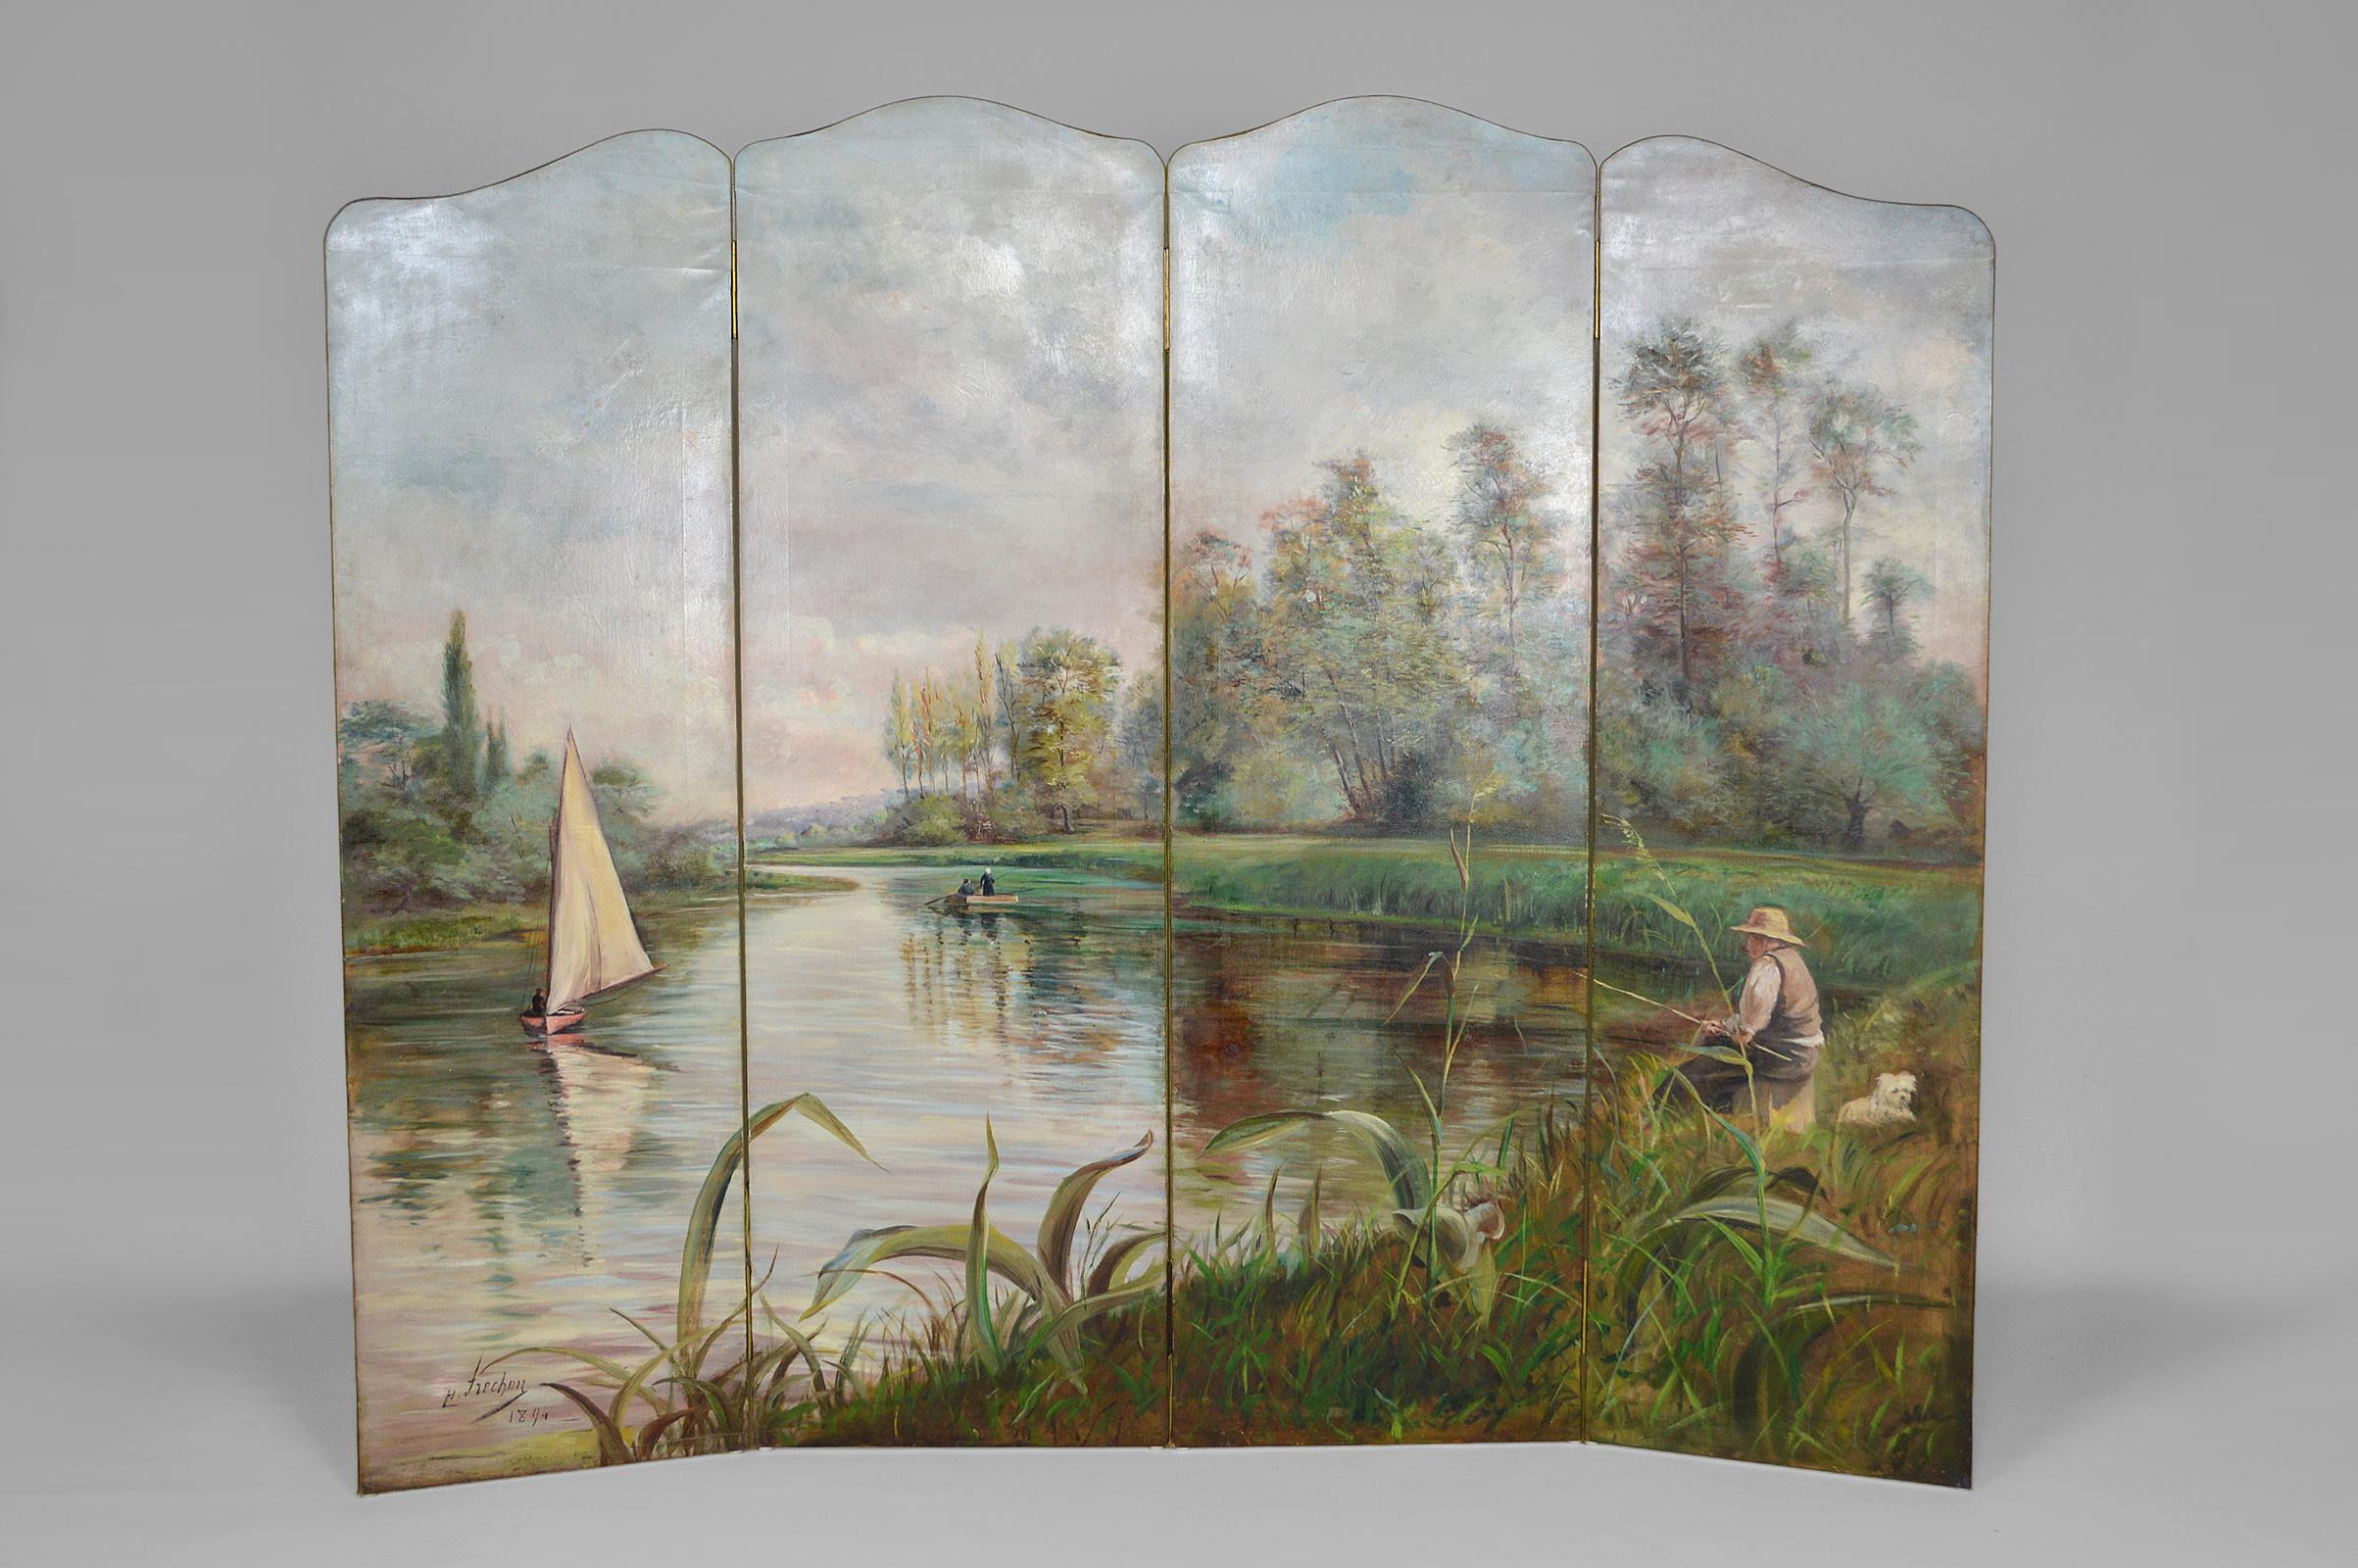 Superb impressionist folding screen with 4 panels in painted canvas.

The painting depicts the shores of a canal. We see a fisherman on the right bank, accompanied by his little white dog quietly sitting in the grass. The man observes the 2 boats